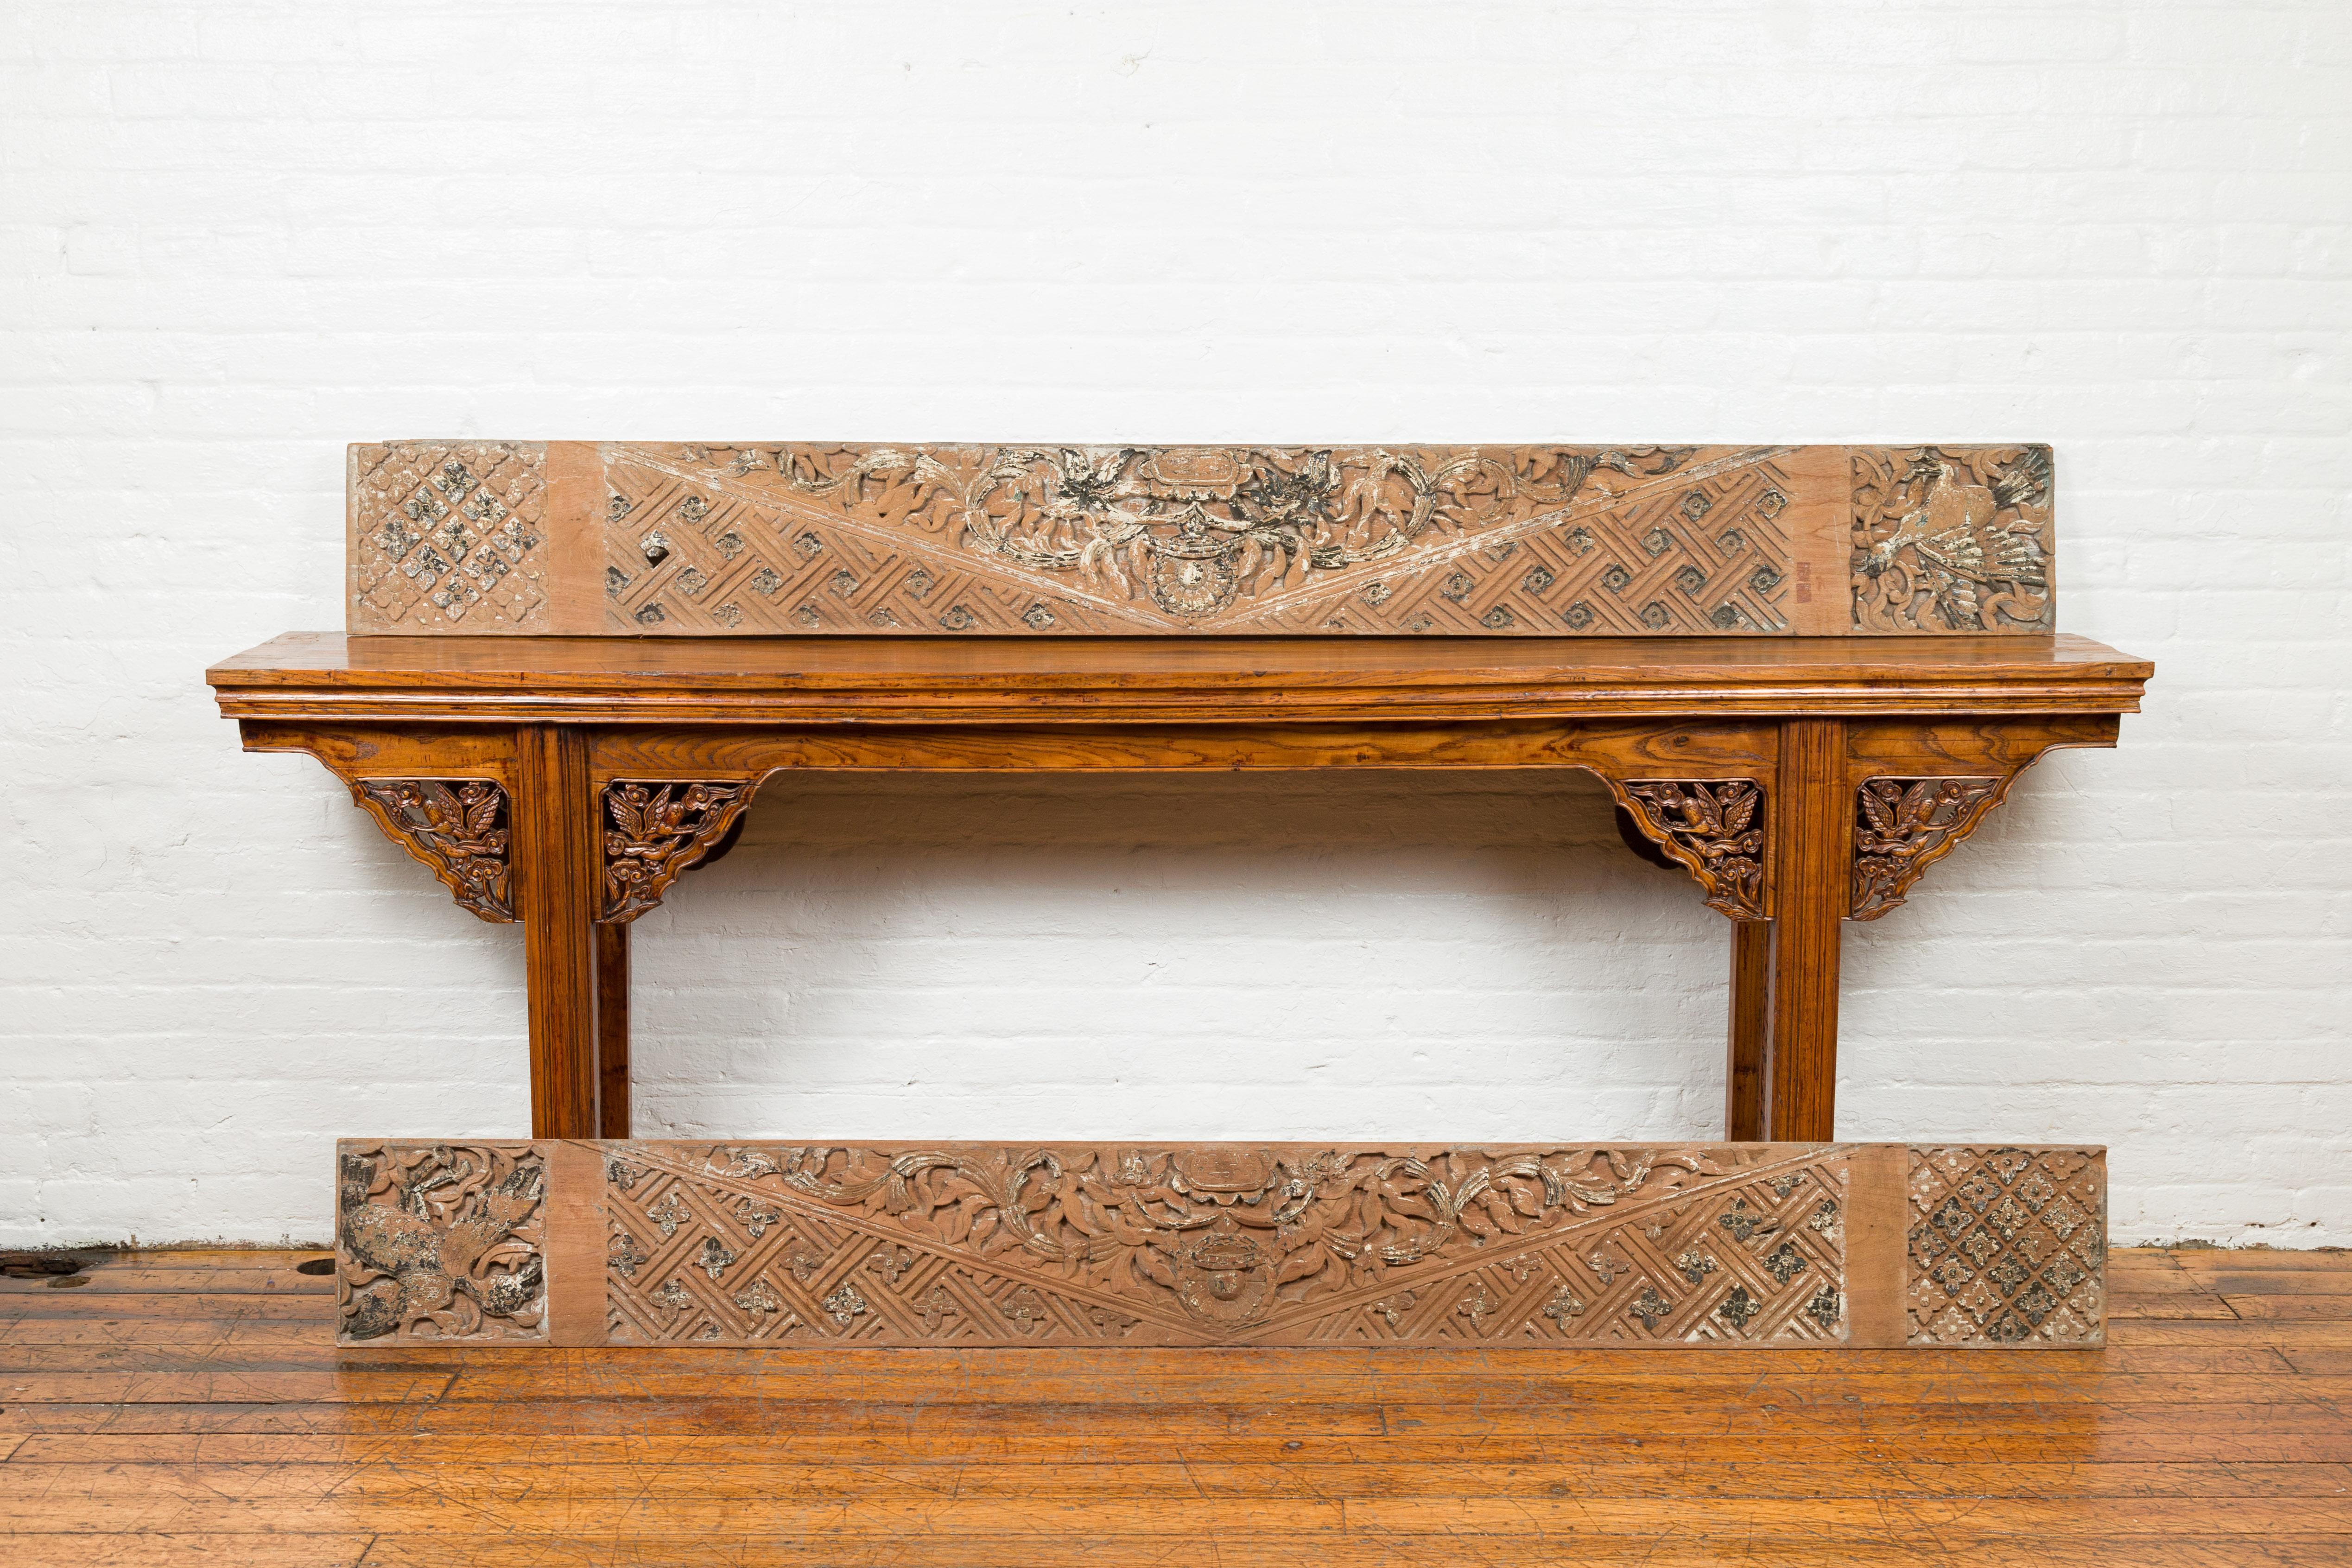 A pair of antique Indonesian carved wooden panels from the 19th century, with traces of original paint. Crafted in Indonesia, each of these horizontal carved panels features geometric motifs surrounding a delicate scrolling foliage, accented with